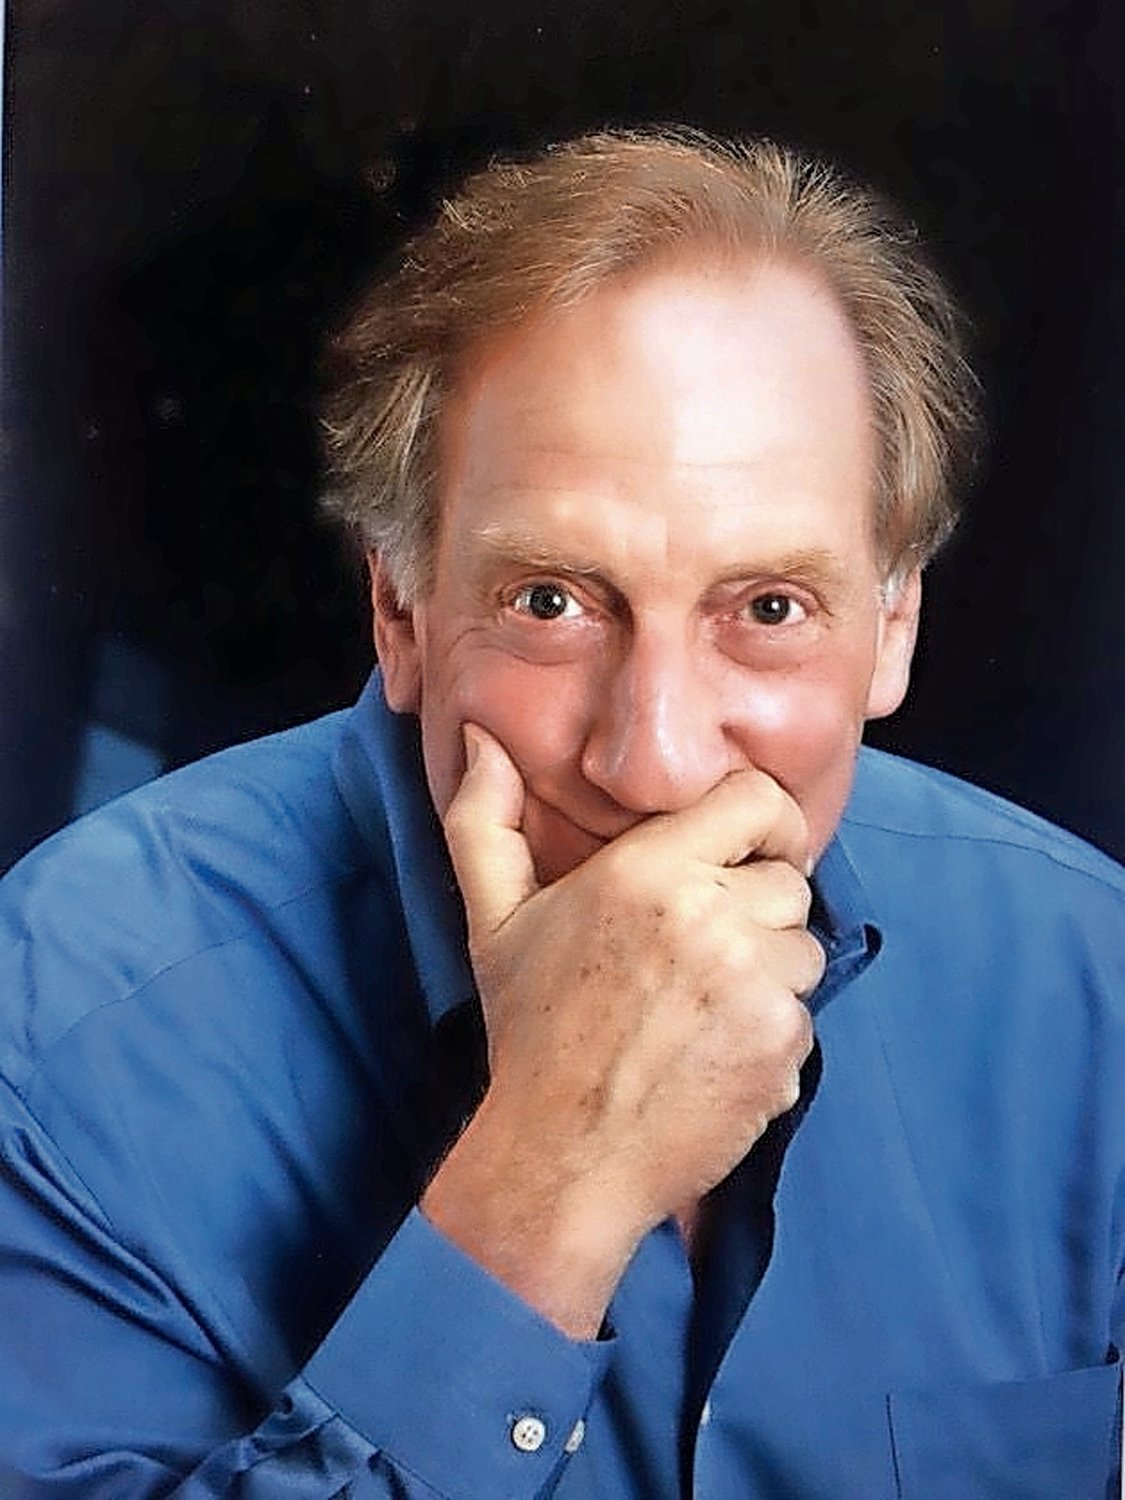 Alan zweibel came from Brooklyn originally, before moving to Wantagh and eventually settling in Woodmere. He has received a lifetime comedy award.